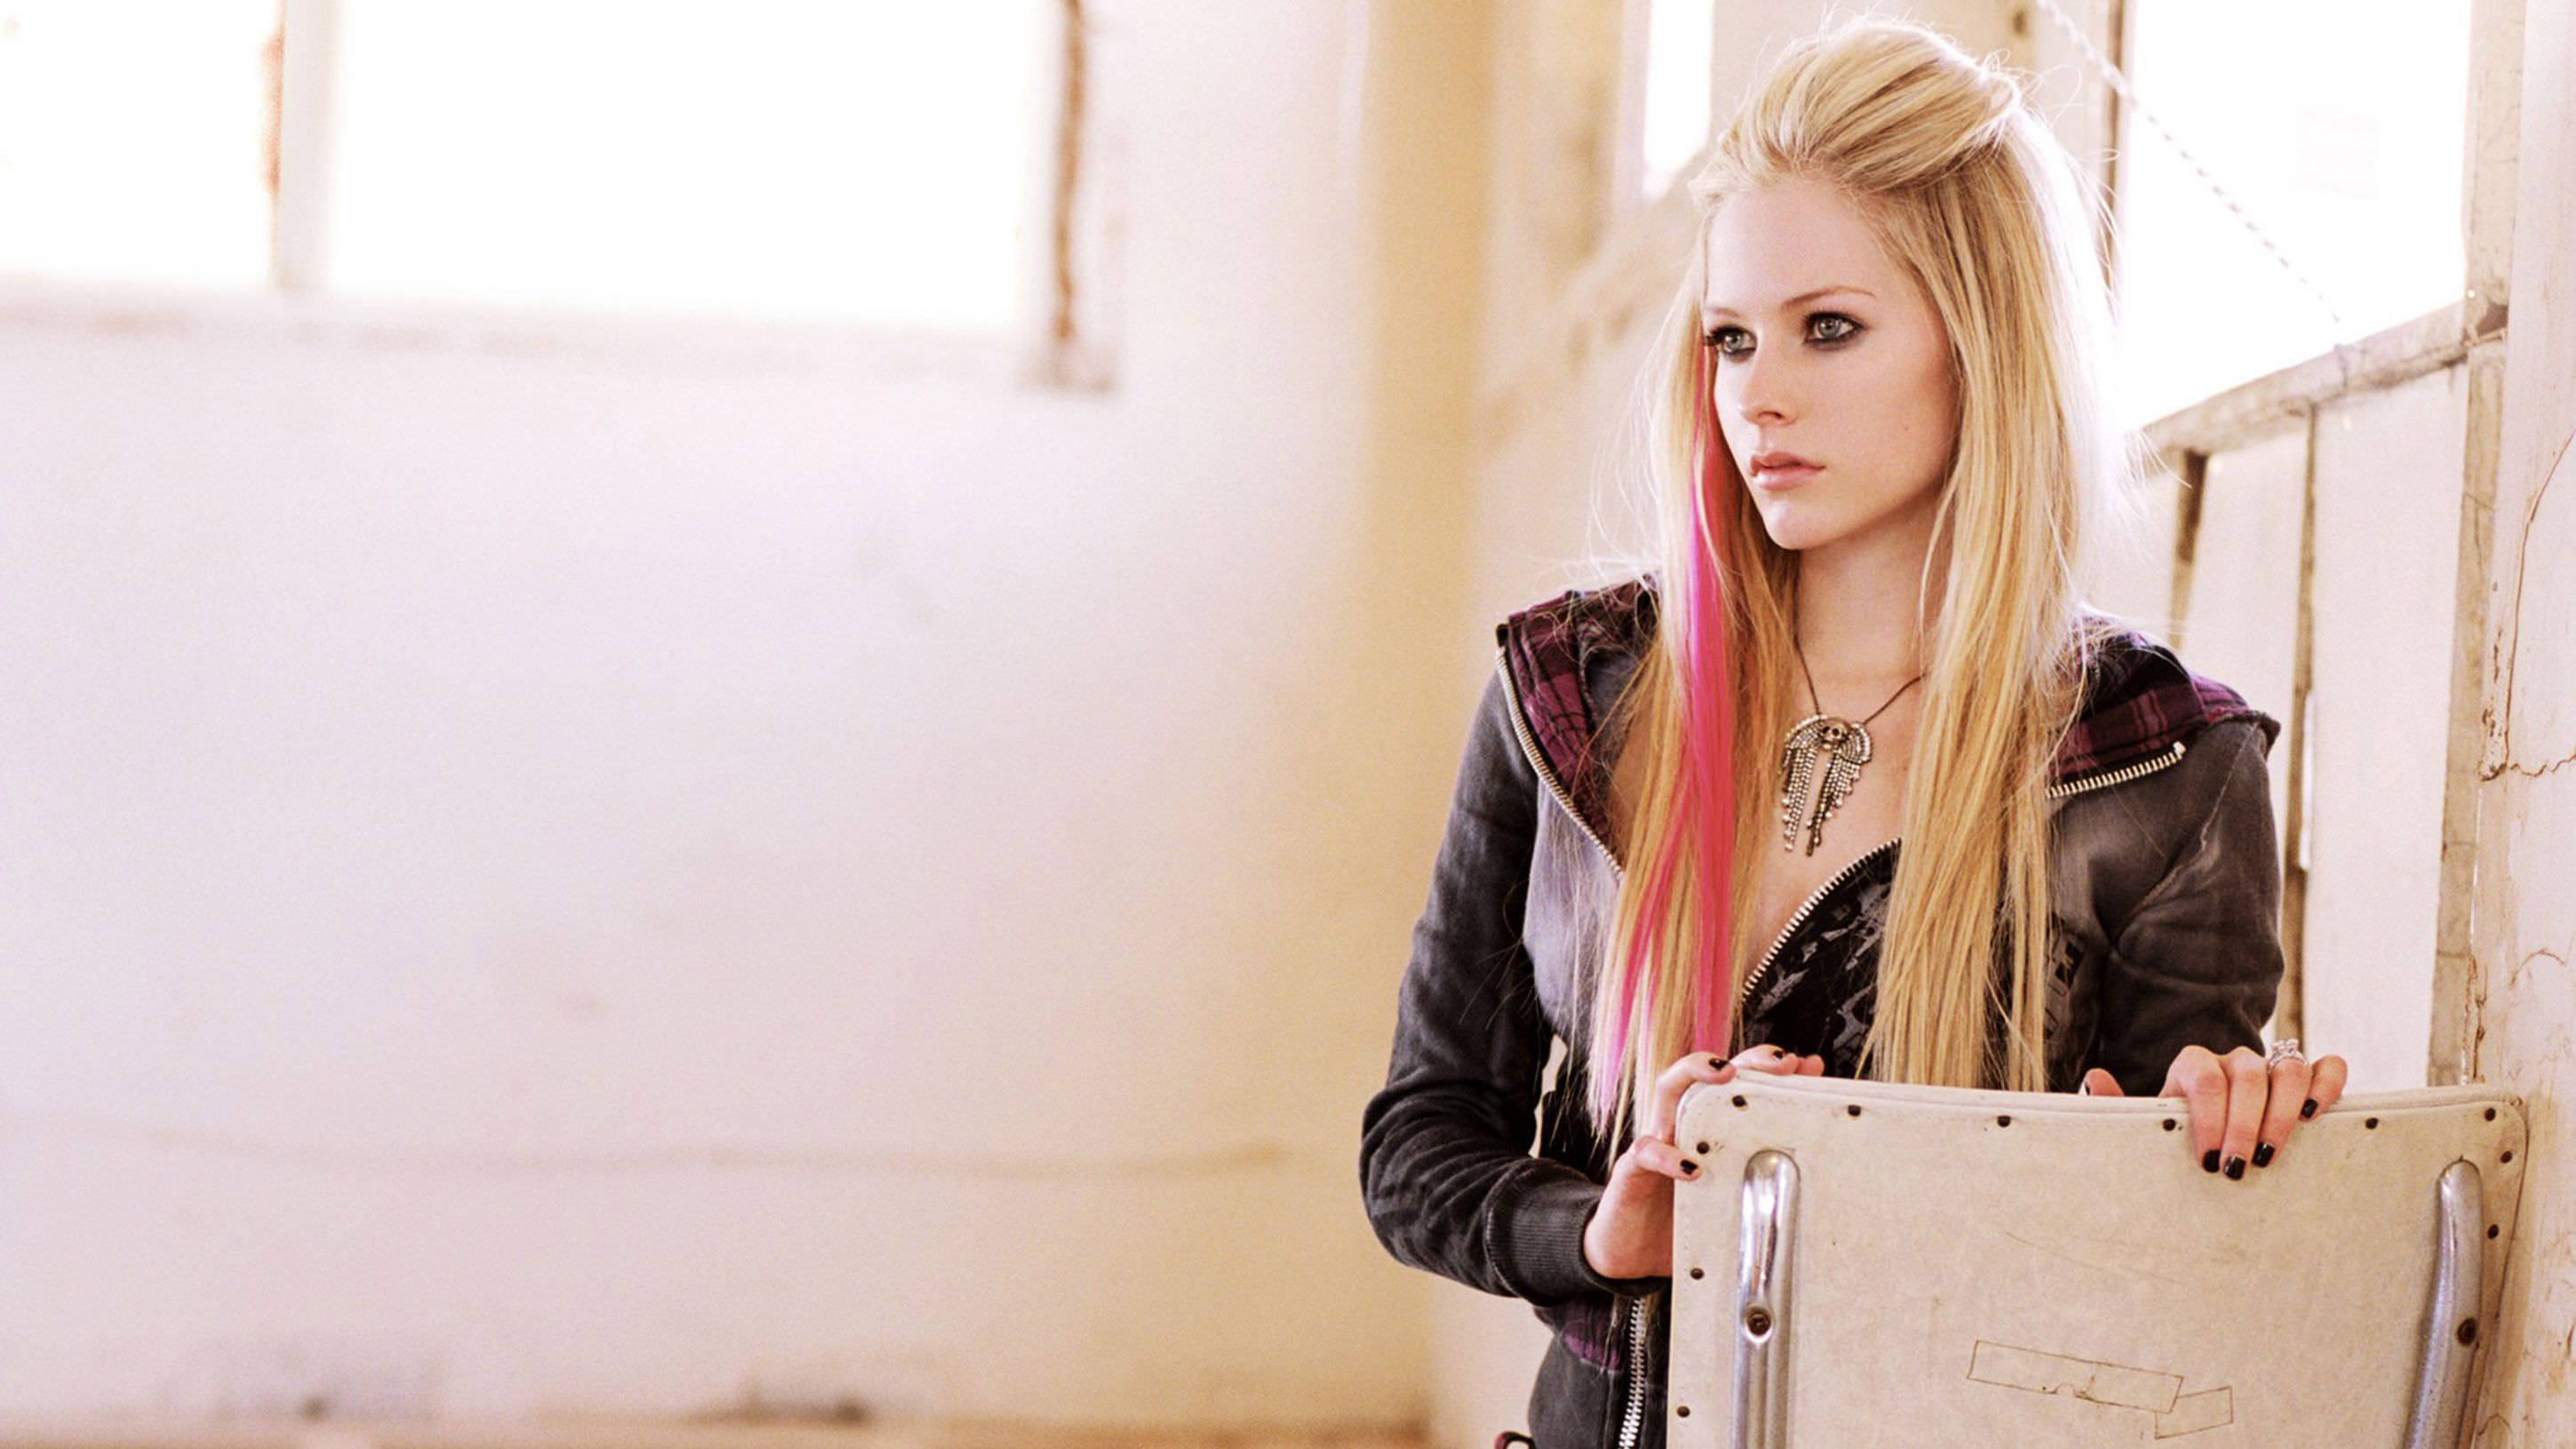 Download Avril Lavigne wallpapers for mobile phone free Avril Lavigne  HD pictures